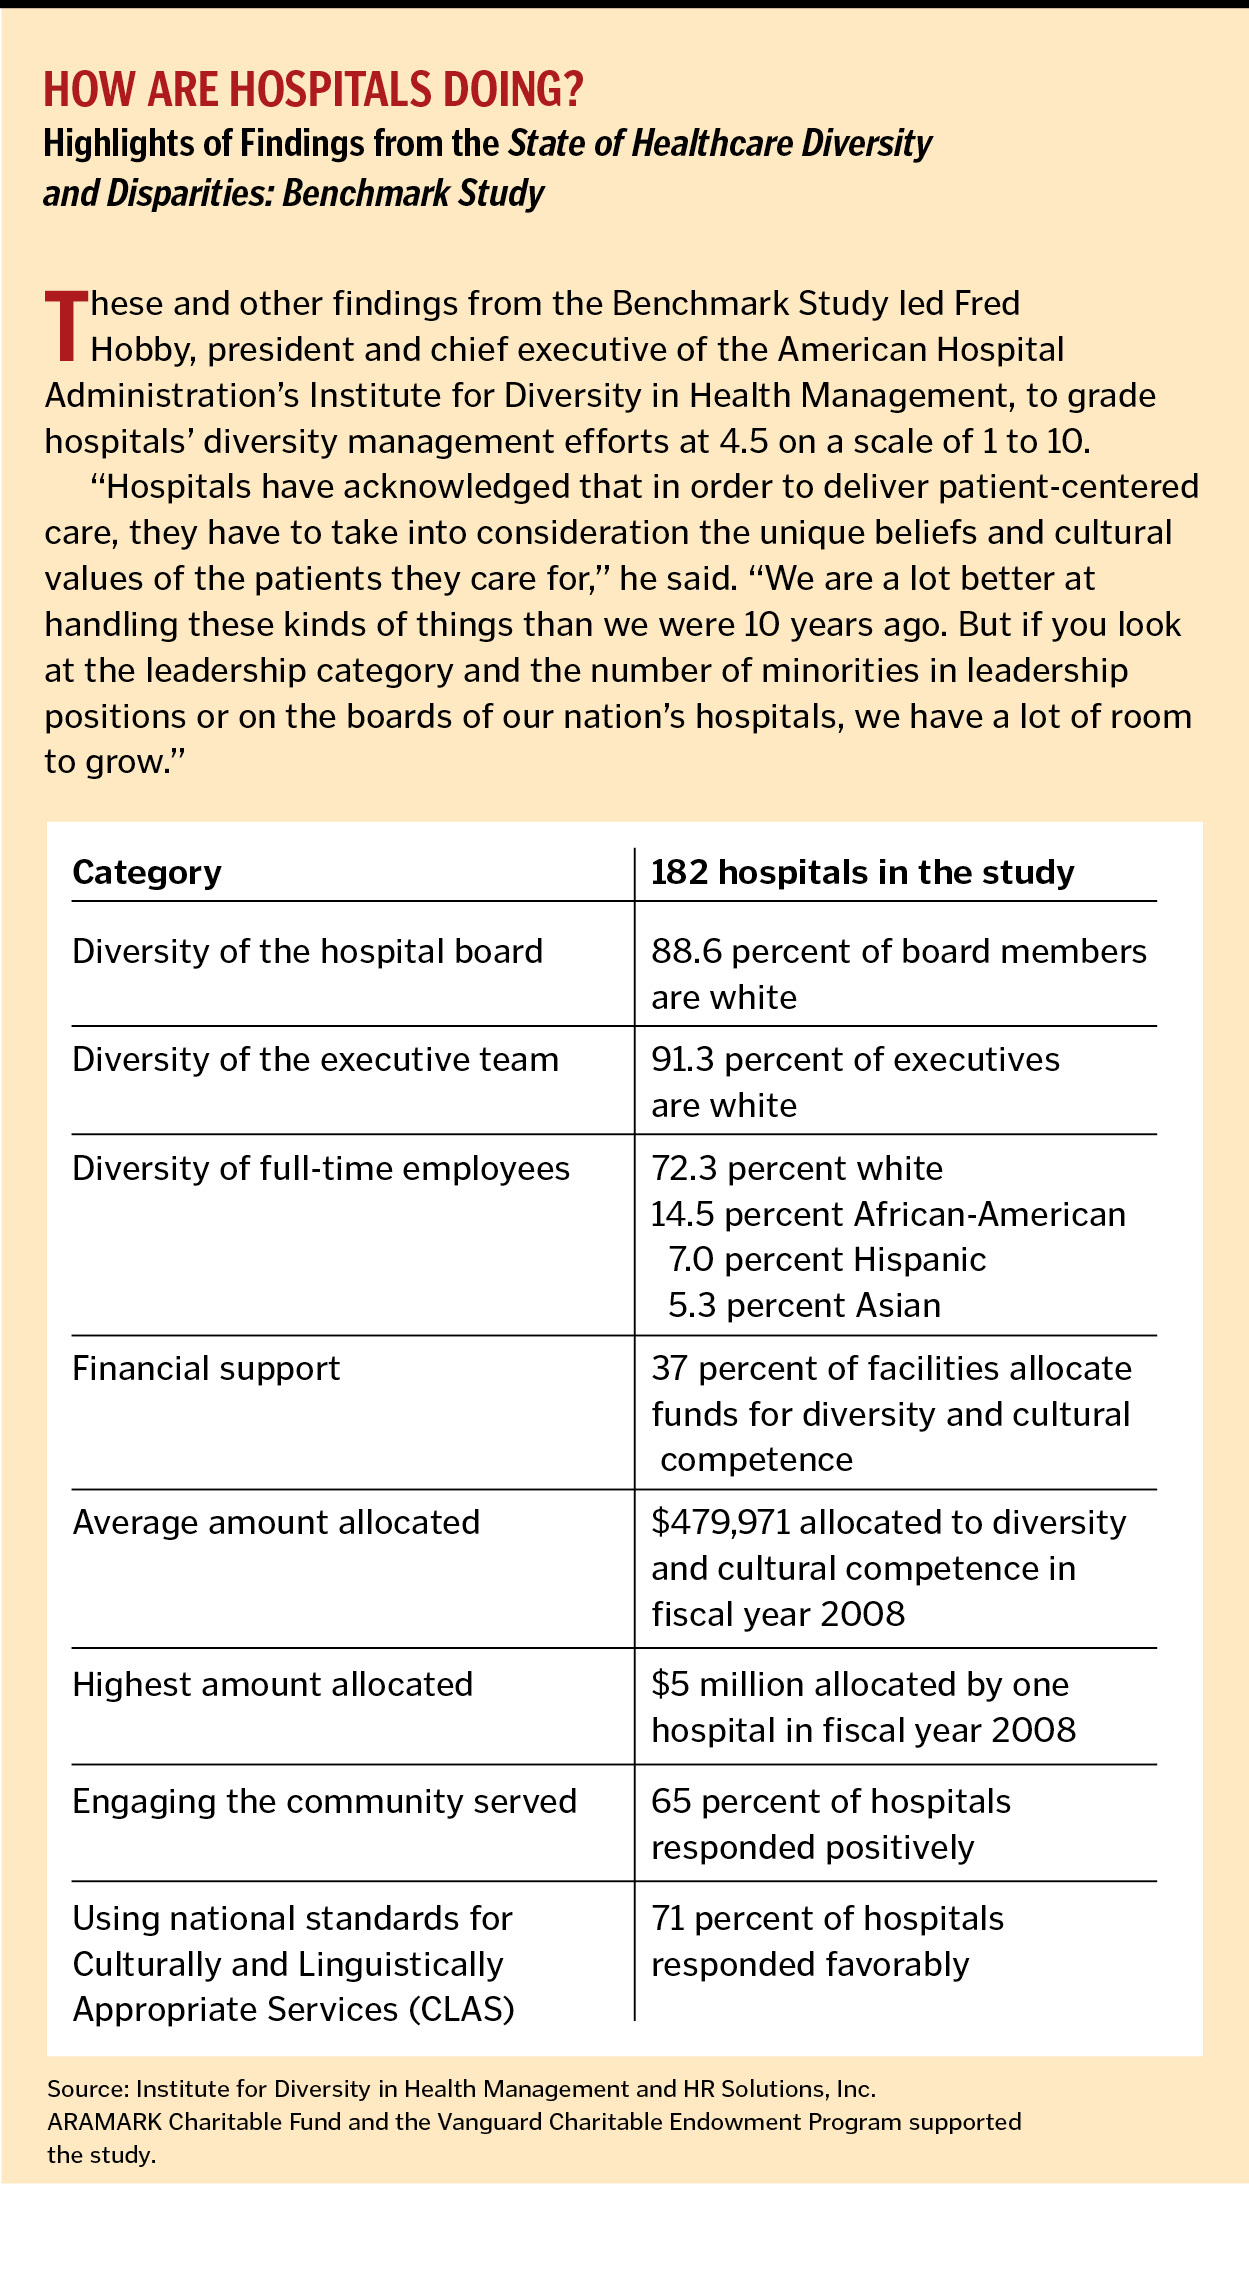 How Are Hospitals Doing?